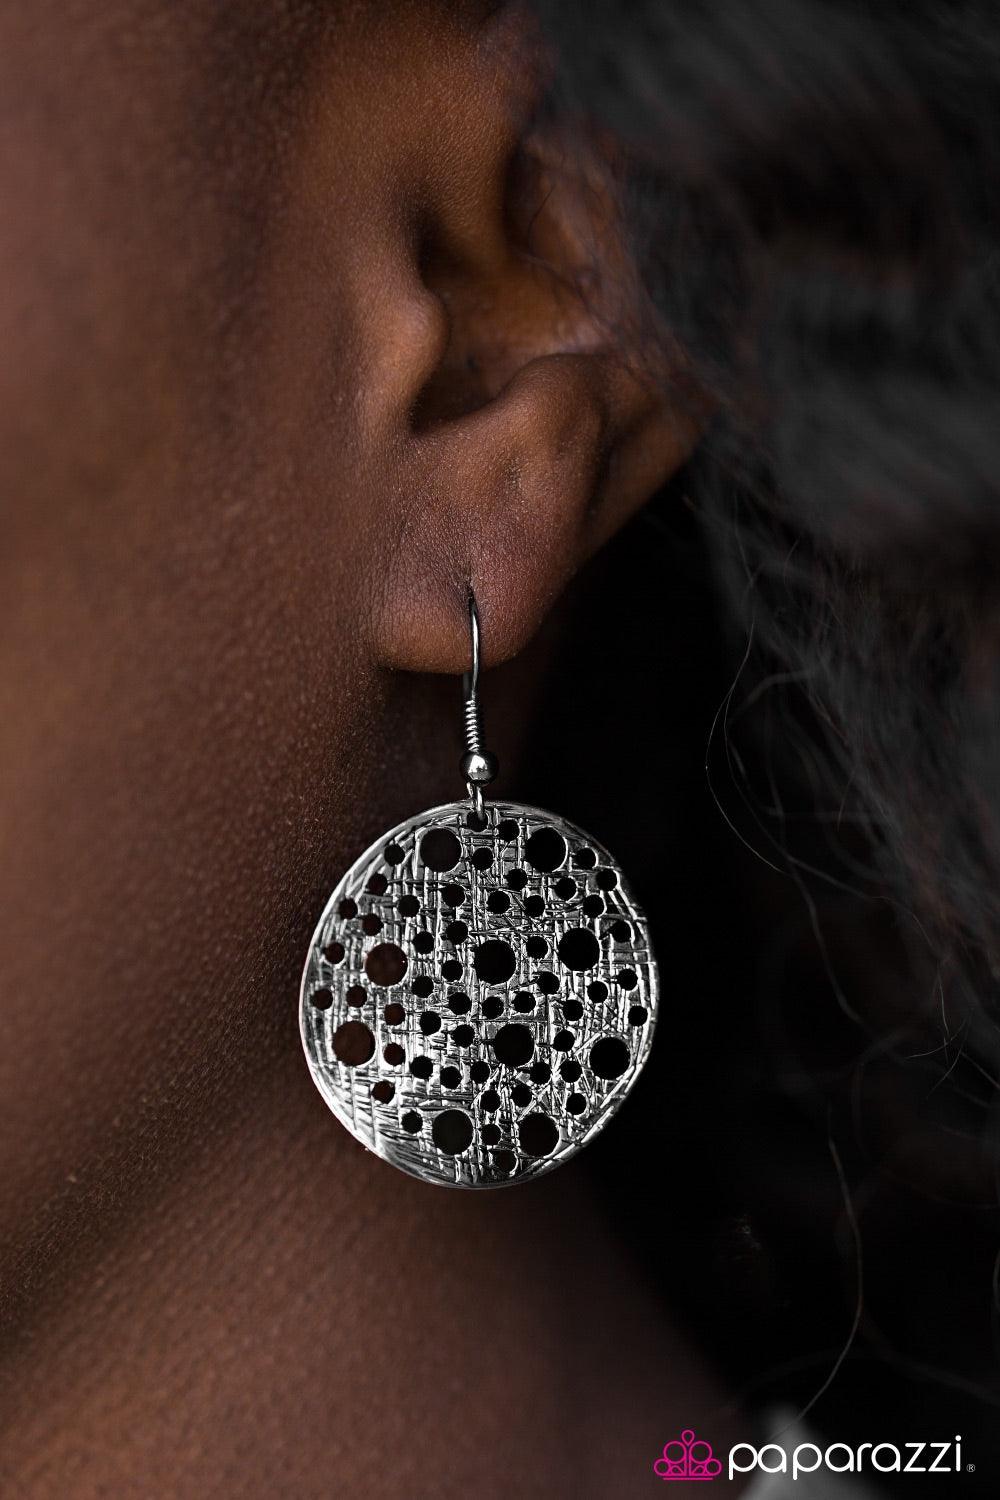 Paparazzi Accessories The HOLE Wide World - Black Brushed in a shiny shimmer, a delicately hammered gunmetal disc swings from the ear. Etched in tactile textures, the gunmetal frame is accented with round holes for an airy finish. Earring attaches to a st